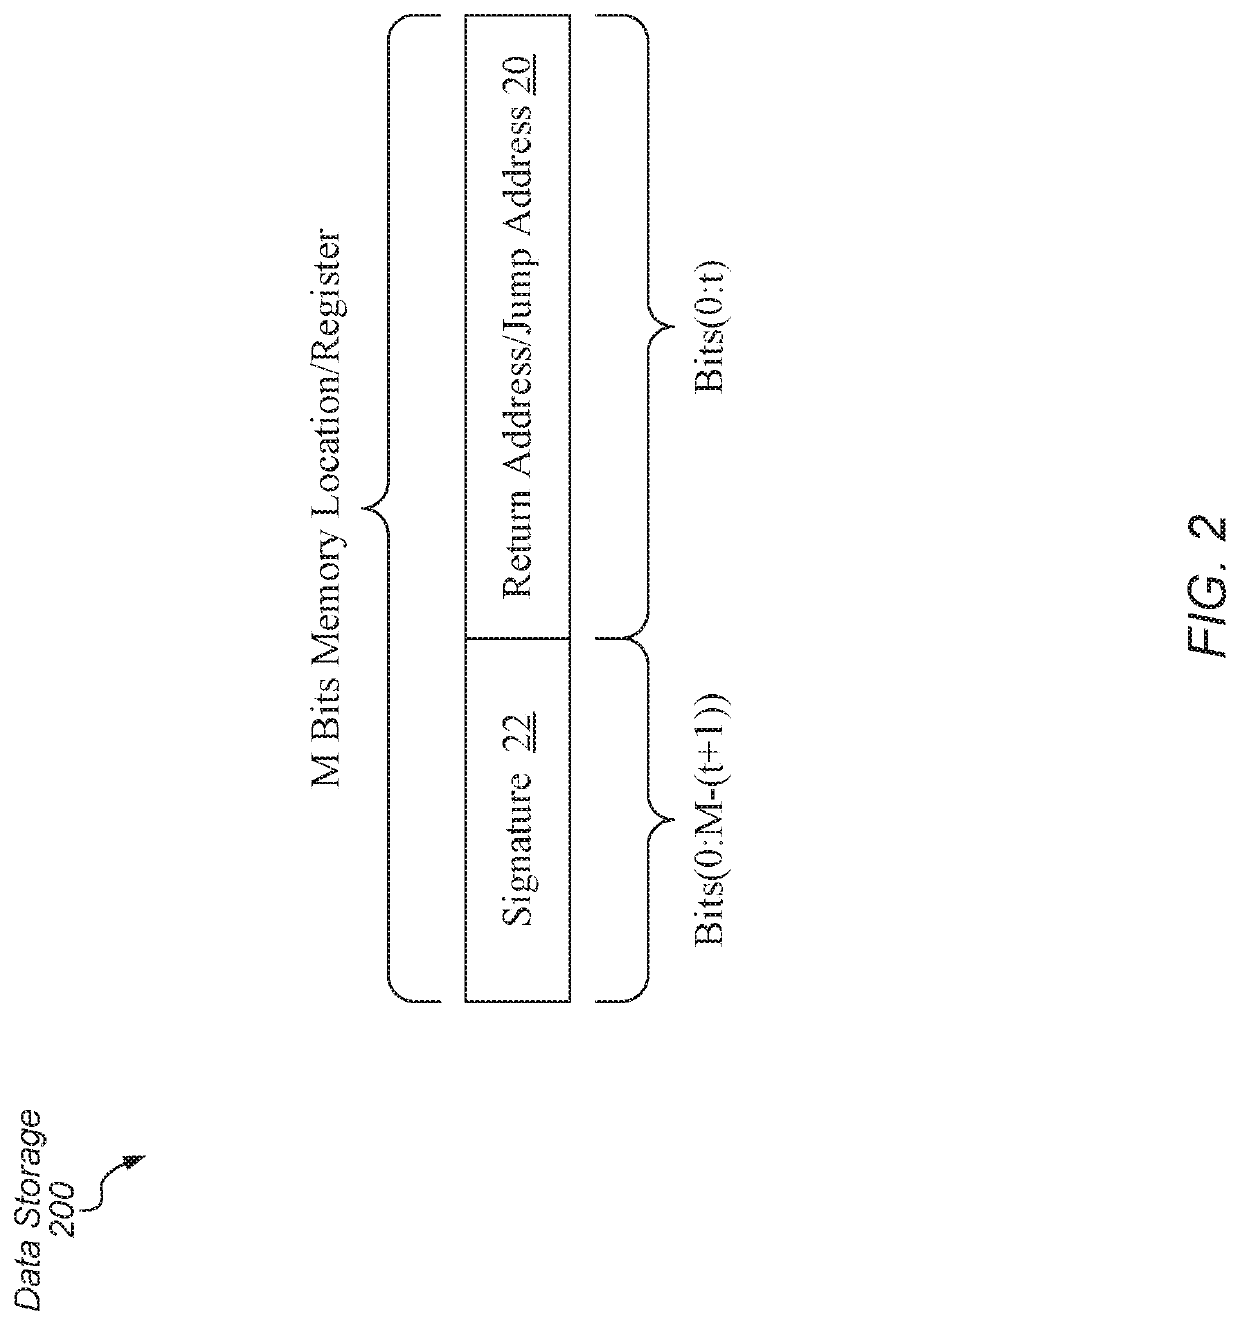 Systems and methods for optimizing authentication branch instructions